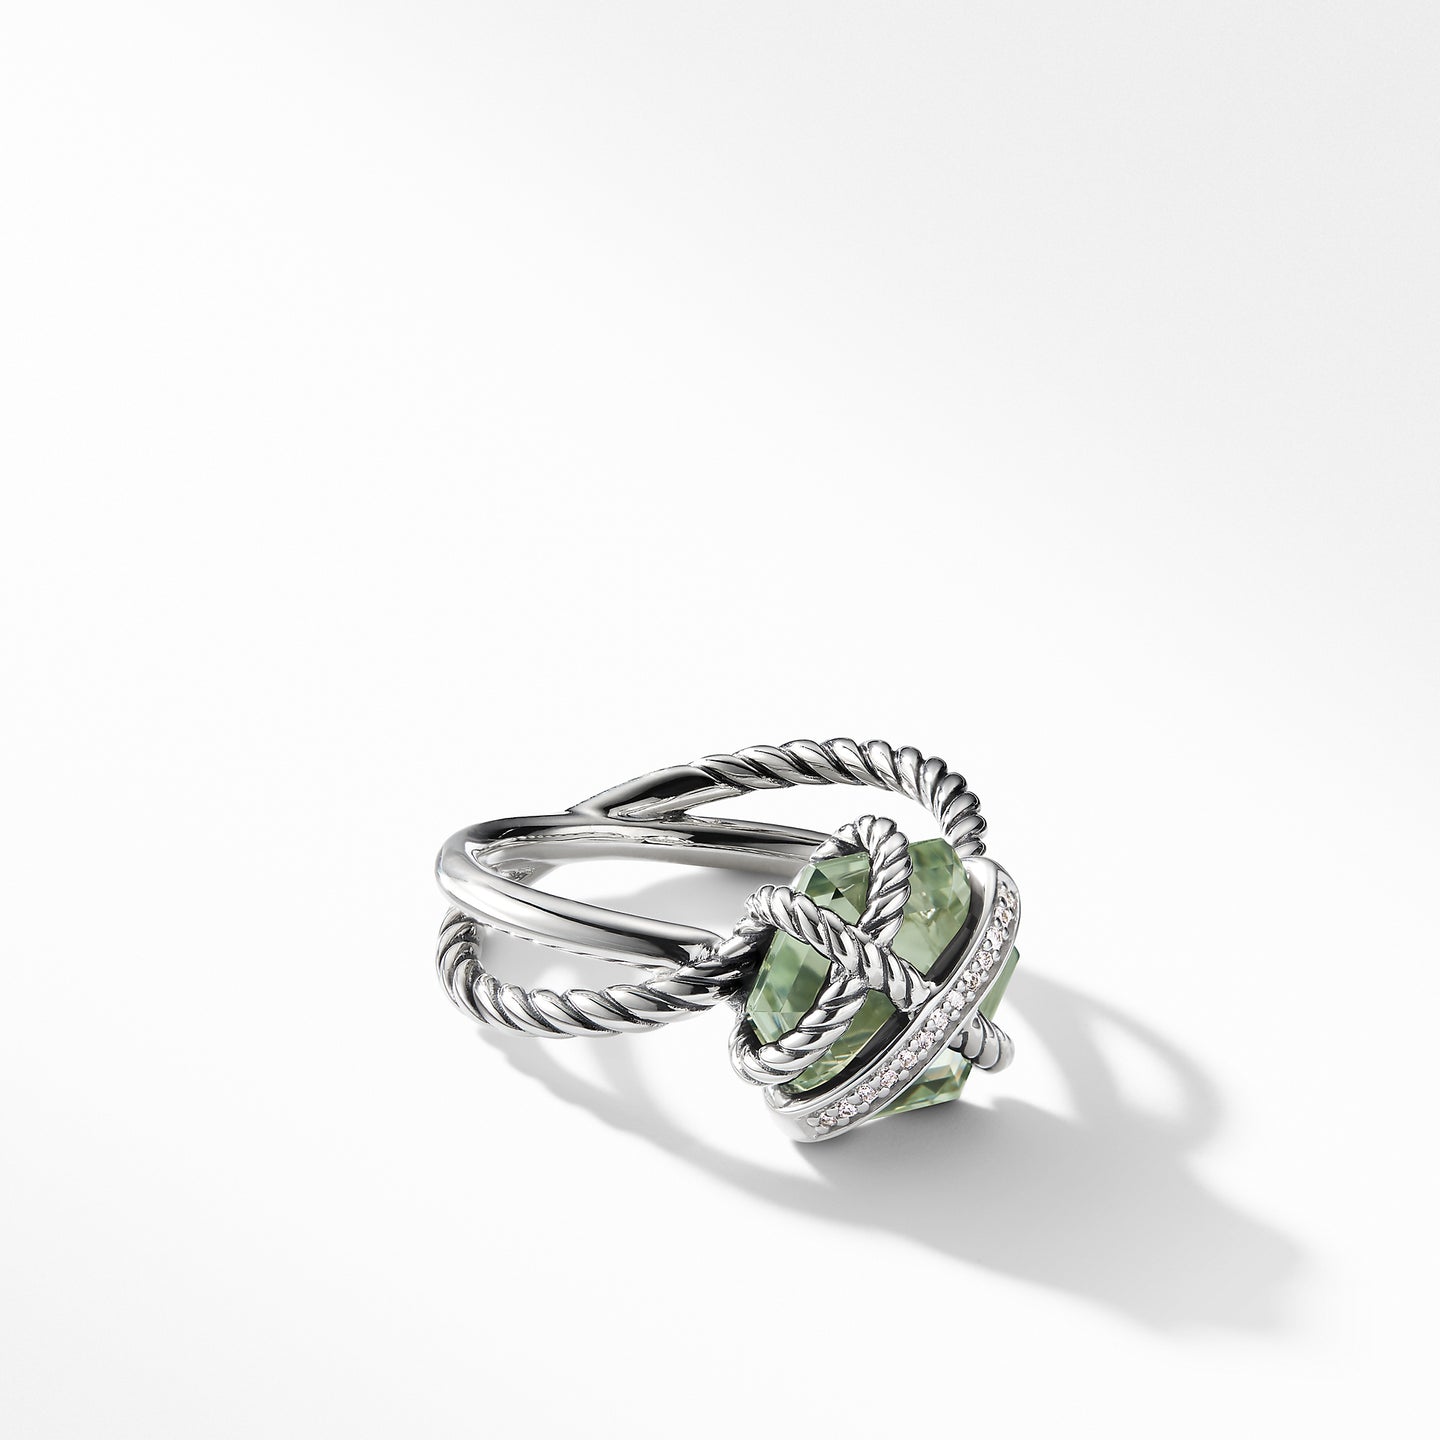 Ring with Prasiolite and Diamonds, Size 9